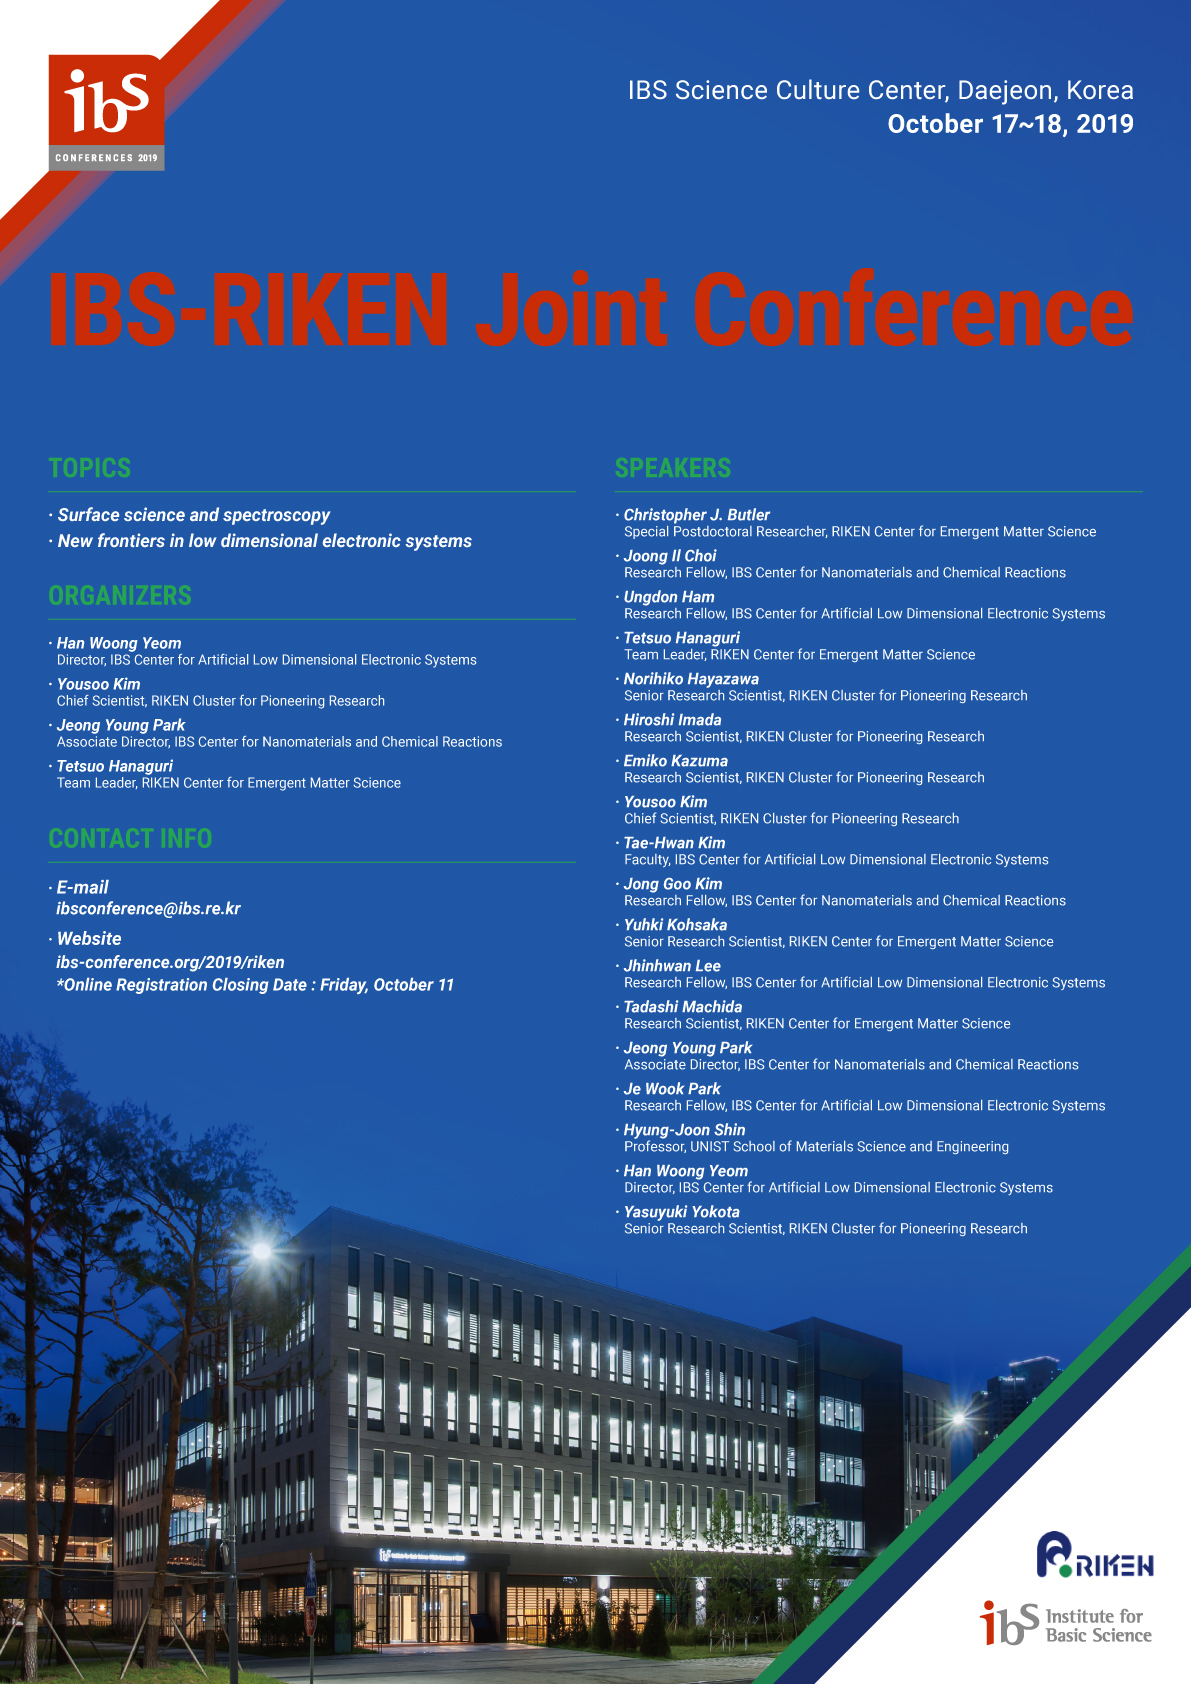 IBS-RIKEN Joint Conference poster